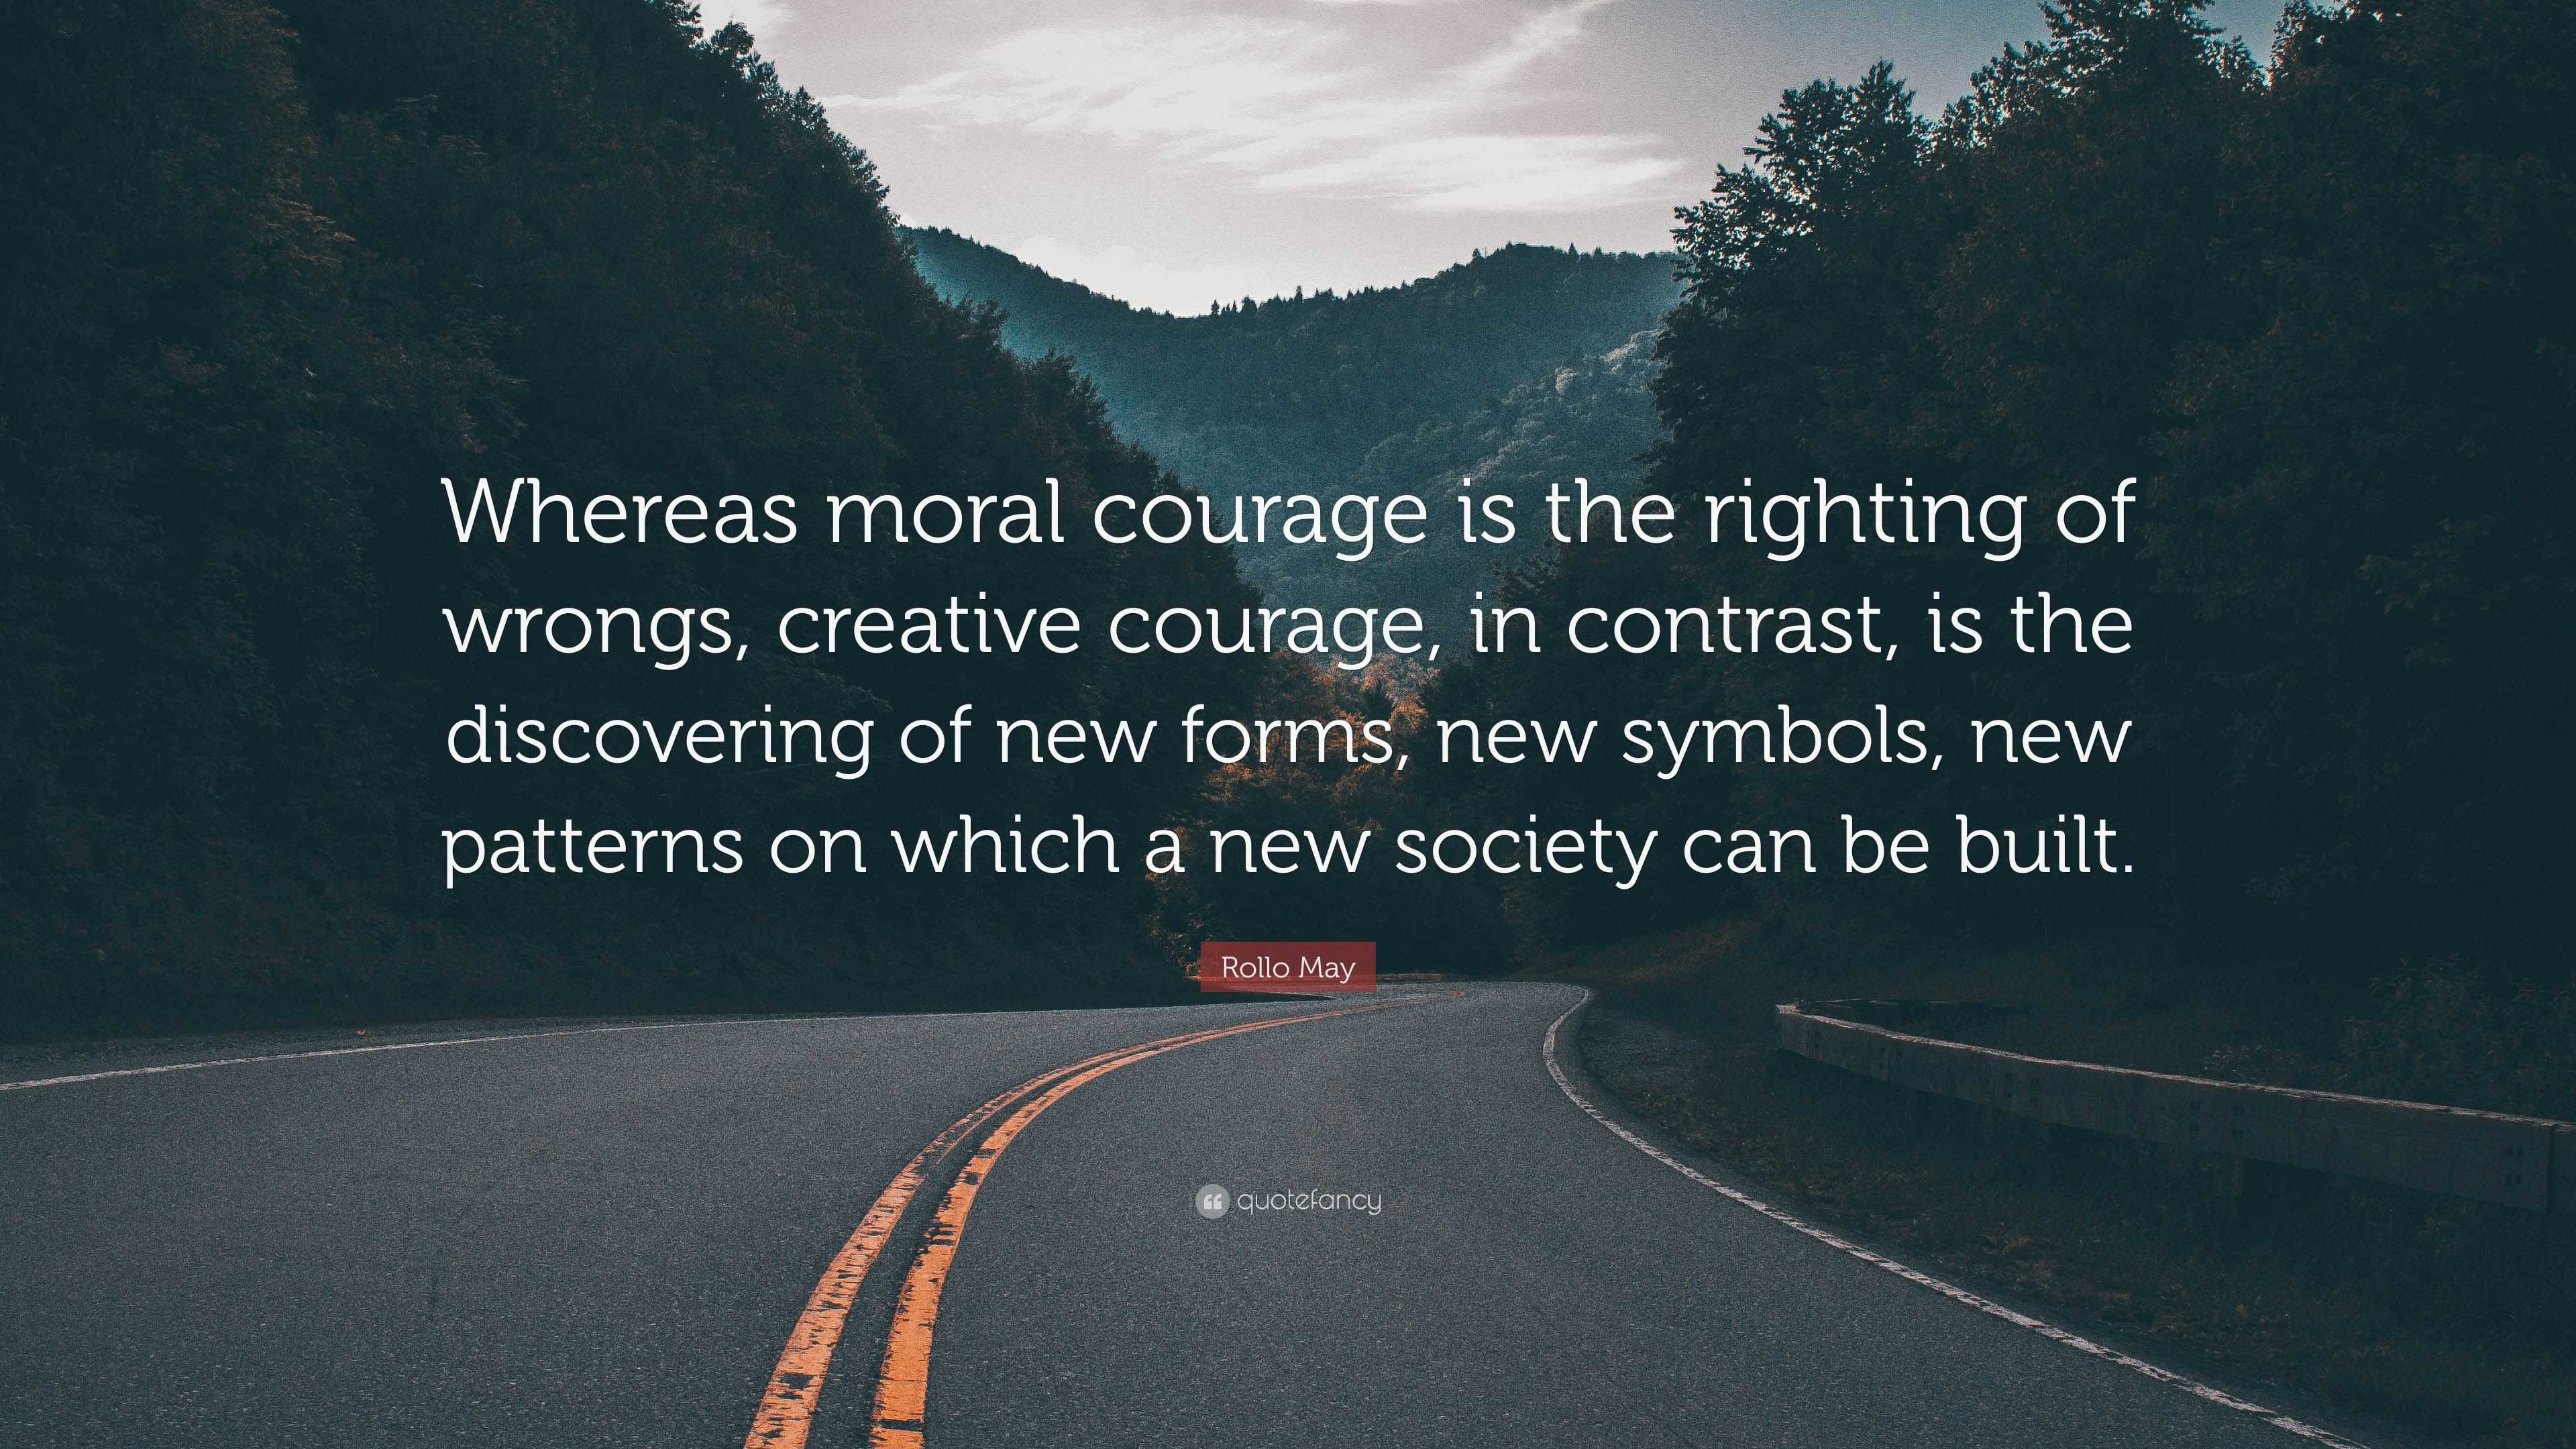 Rollo May Quote: “Whereas moral courage is the righting of wrongs